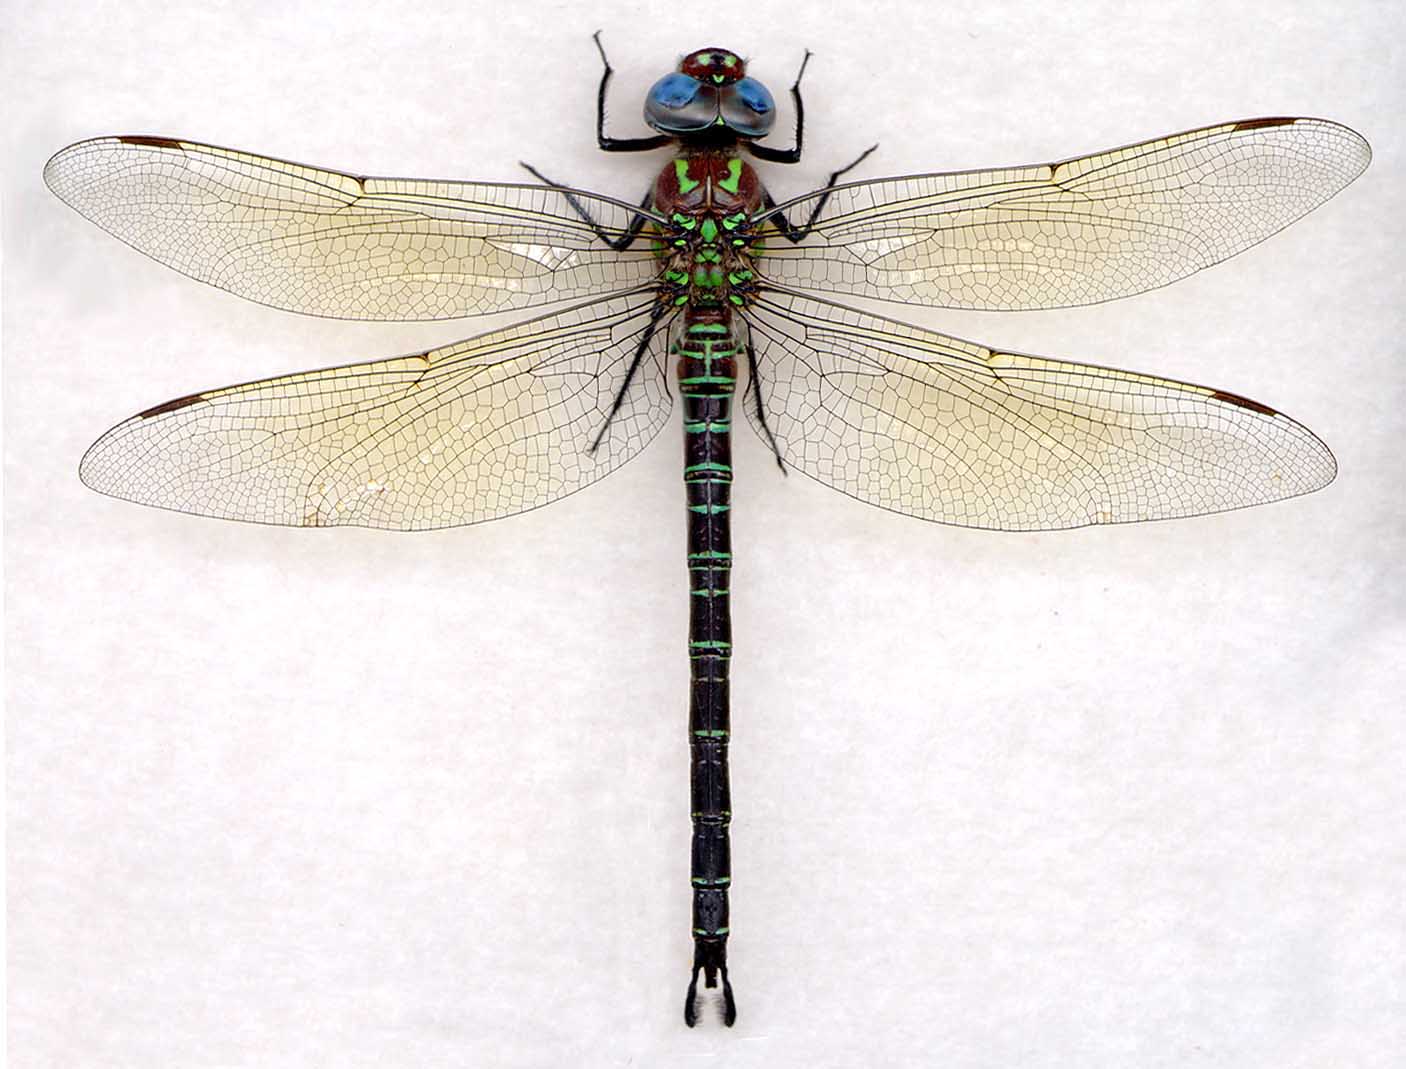 Migratory Dragonfly Species – Common Species | The Dragonfly Woman